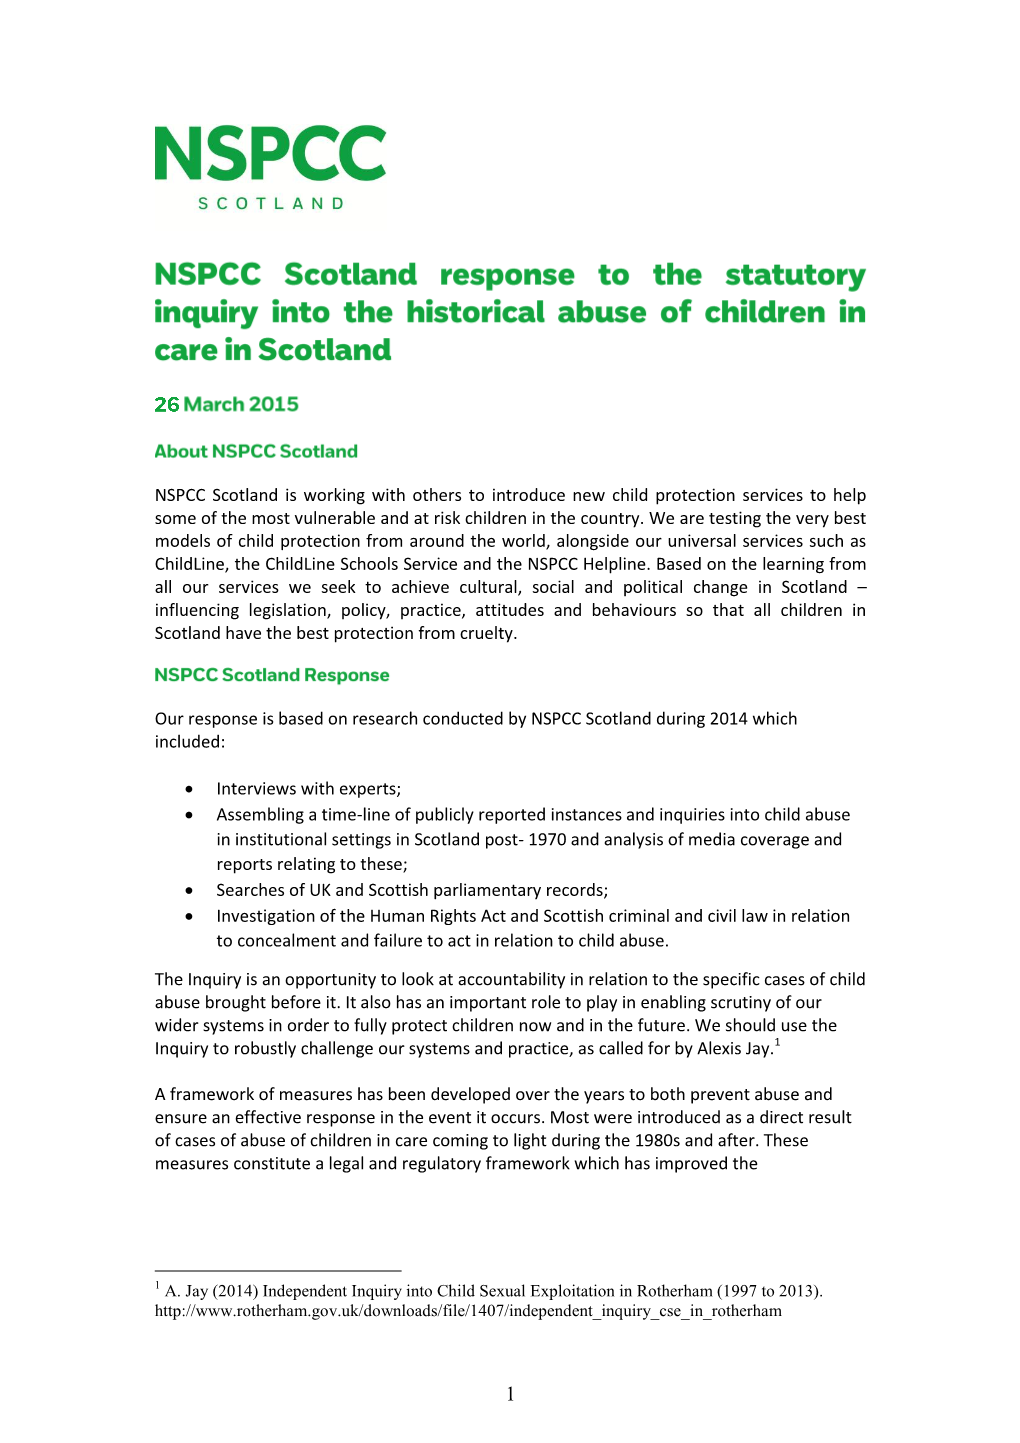 NSPCC Scotland Response to the Statutory Inquiry Into the Historical Abuse of Children in Care In